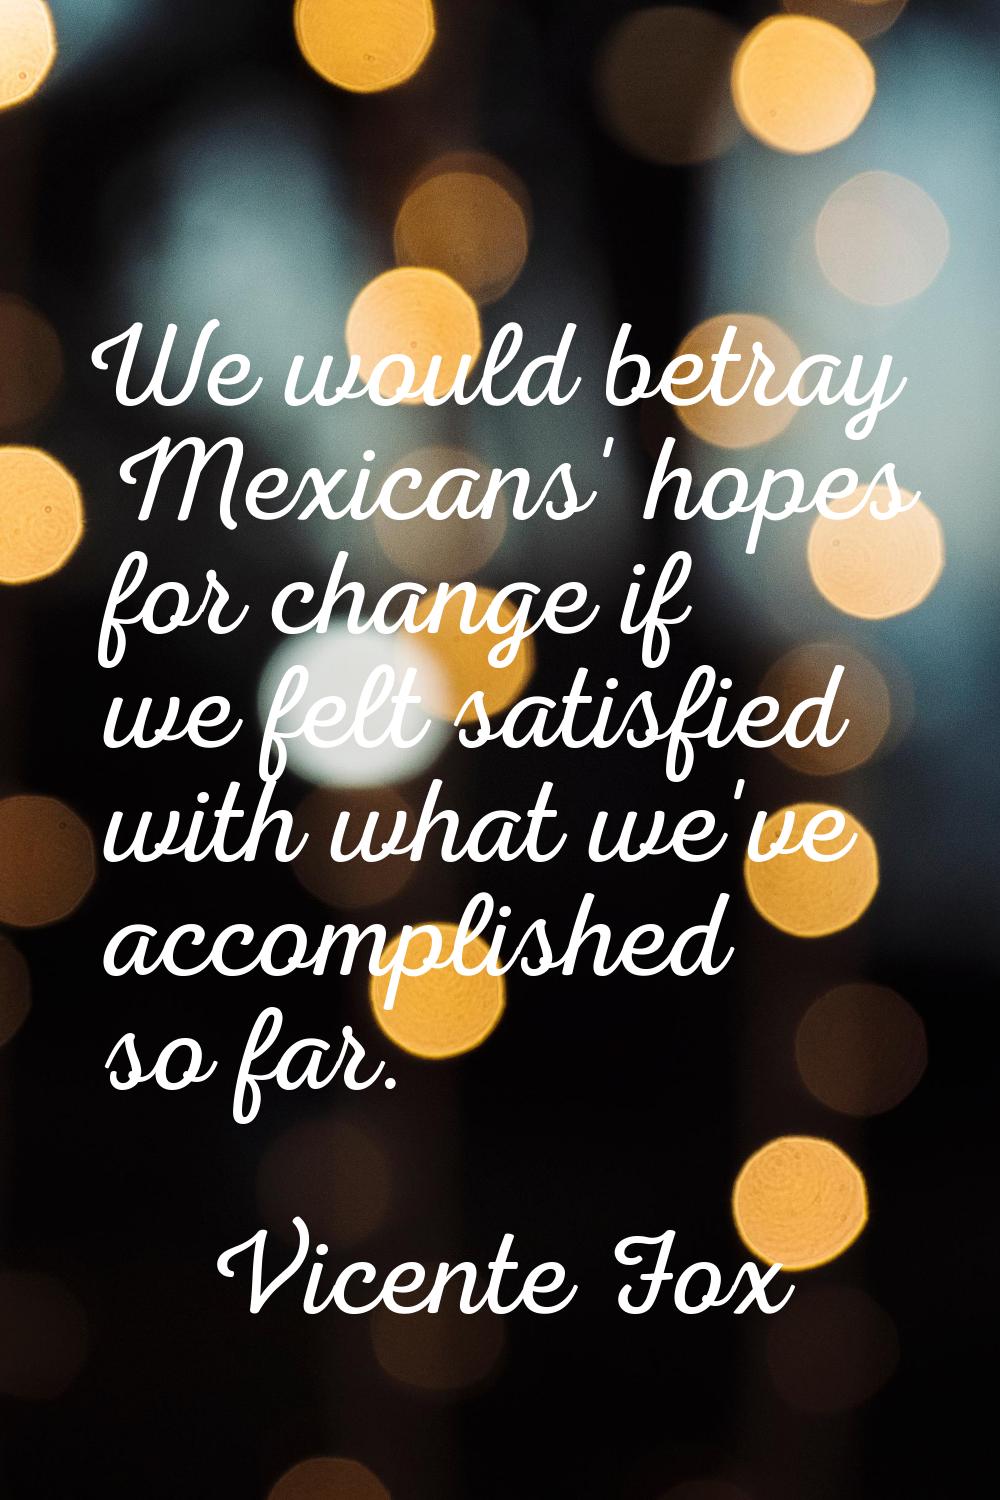 We would betray Mexicans' hopes for change if we felt satisfied with what we've accomplished so far